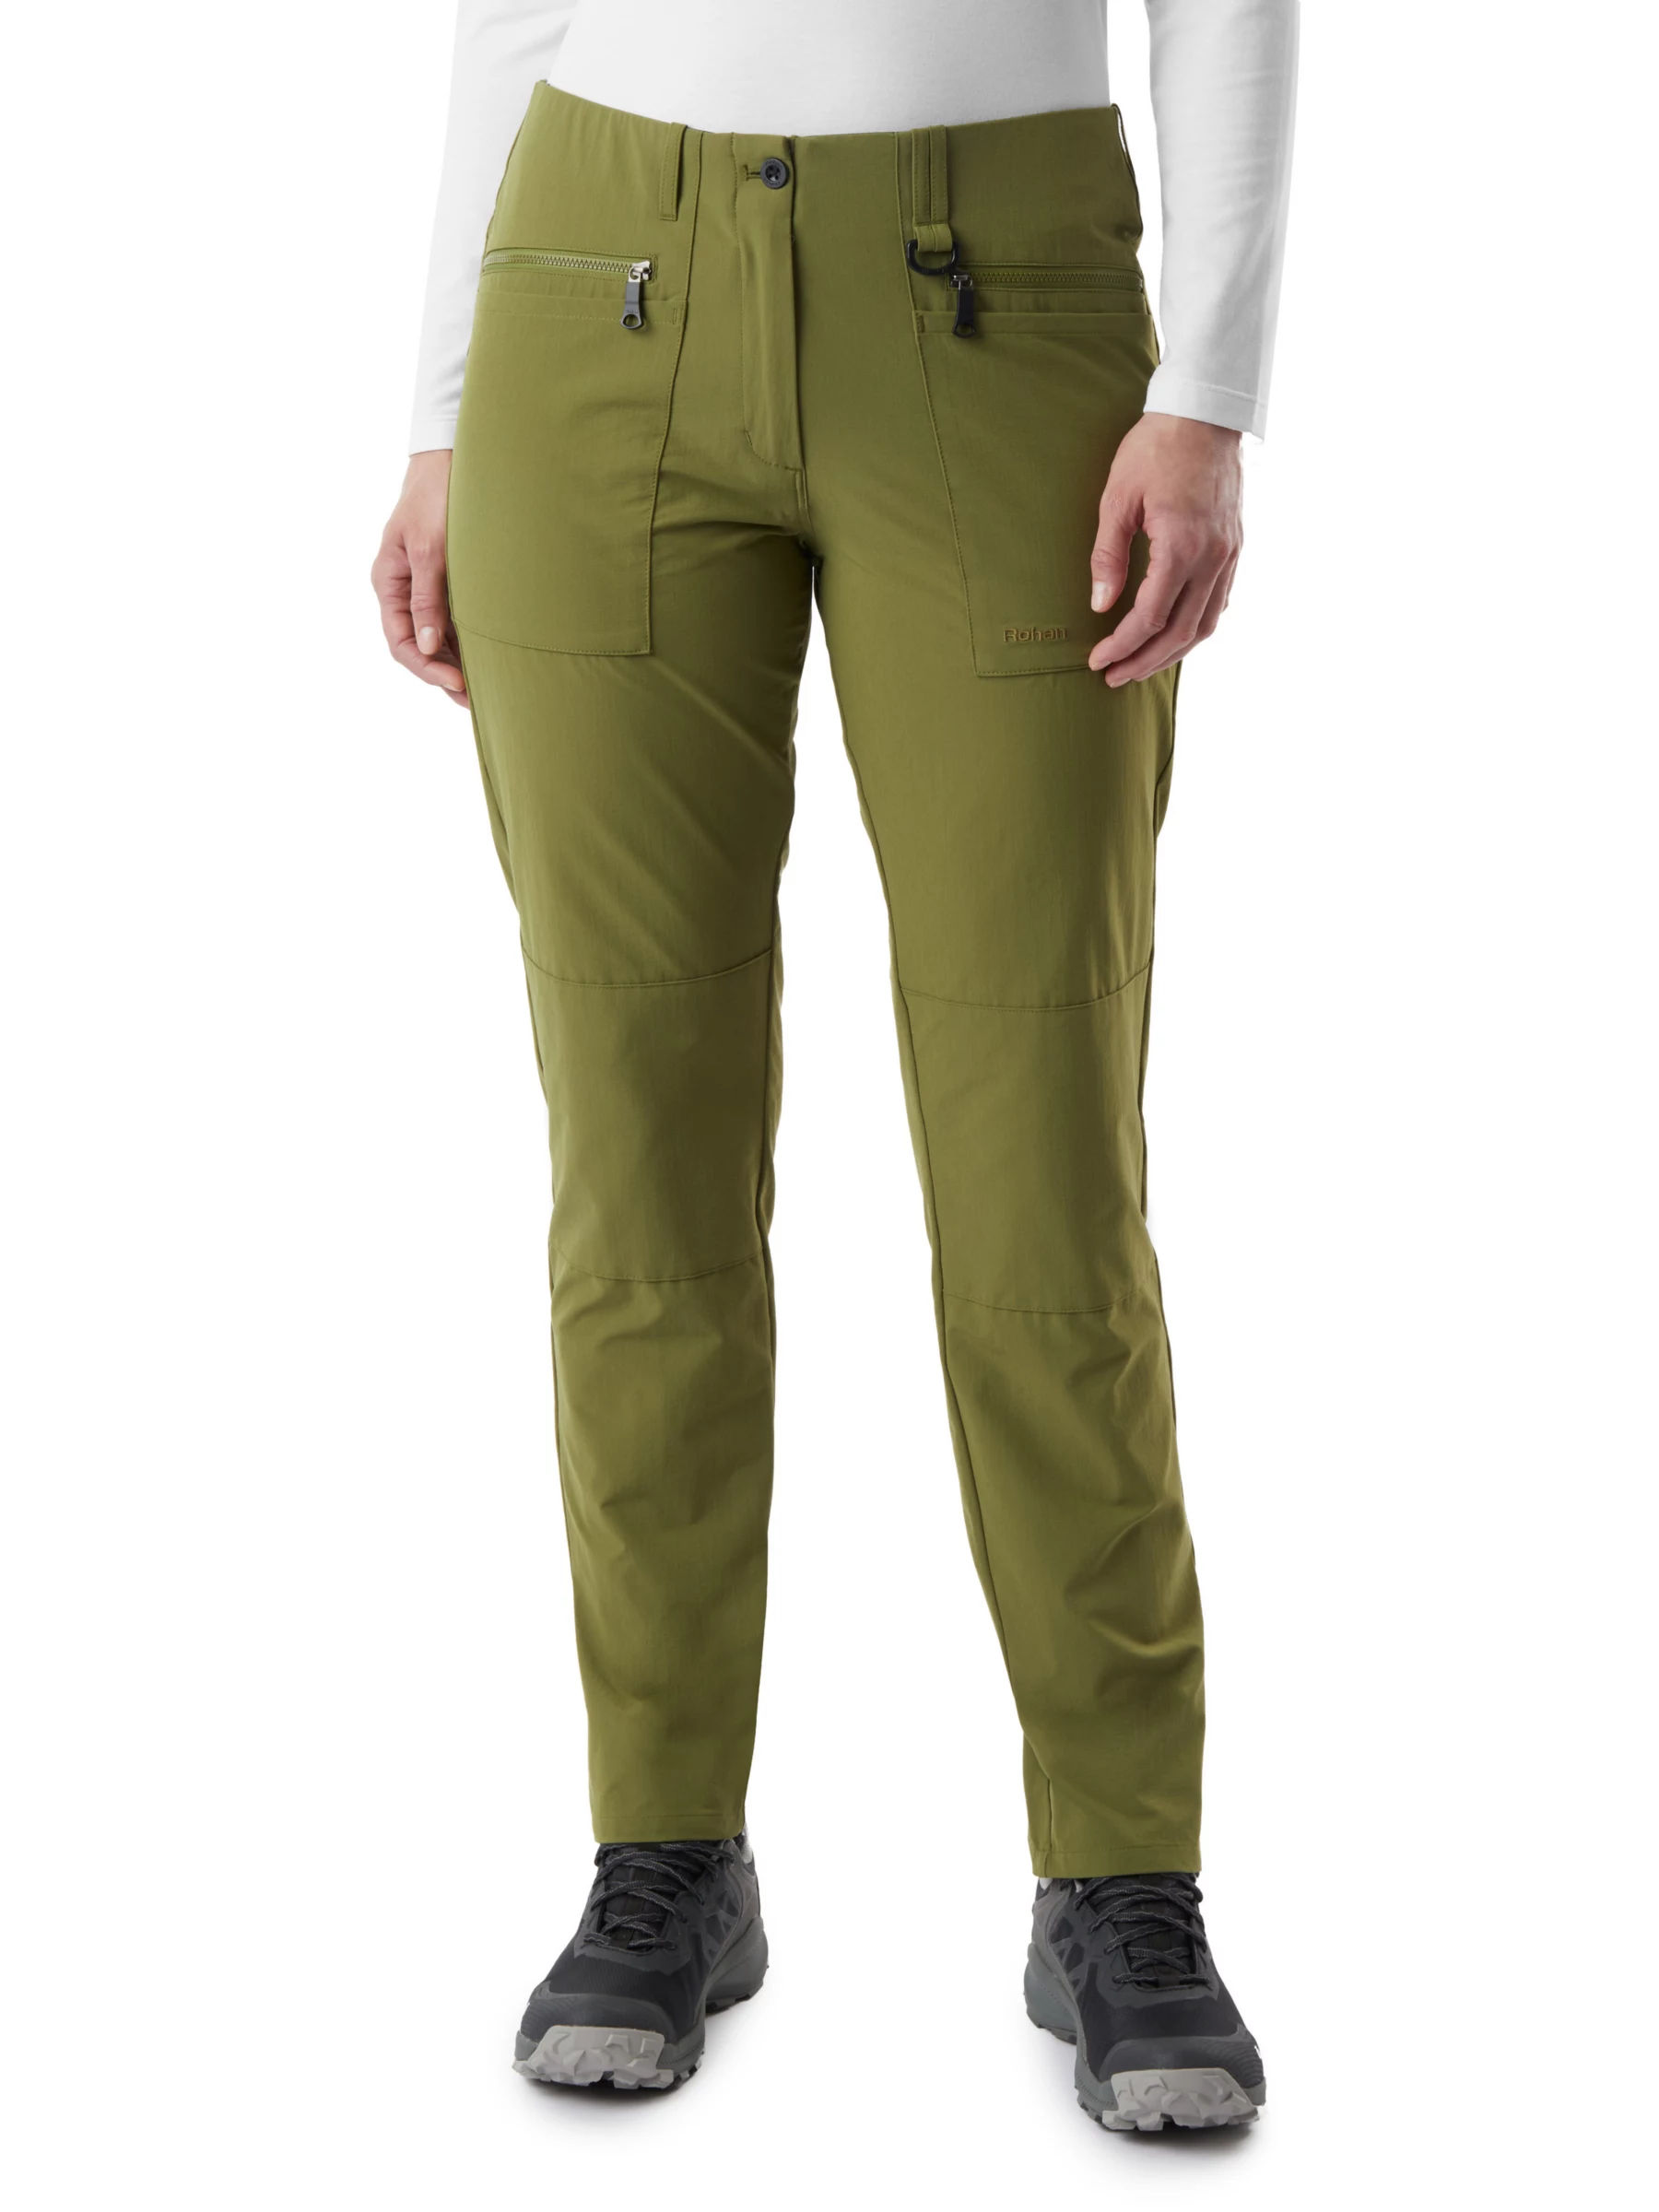 Shop Rohan Hiking Trousers up to 50% Off | DealDoodle